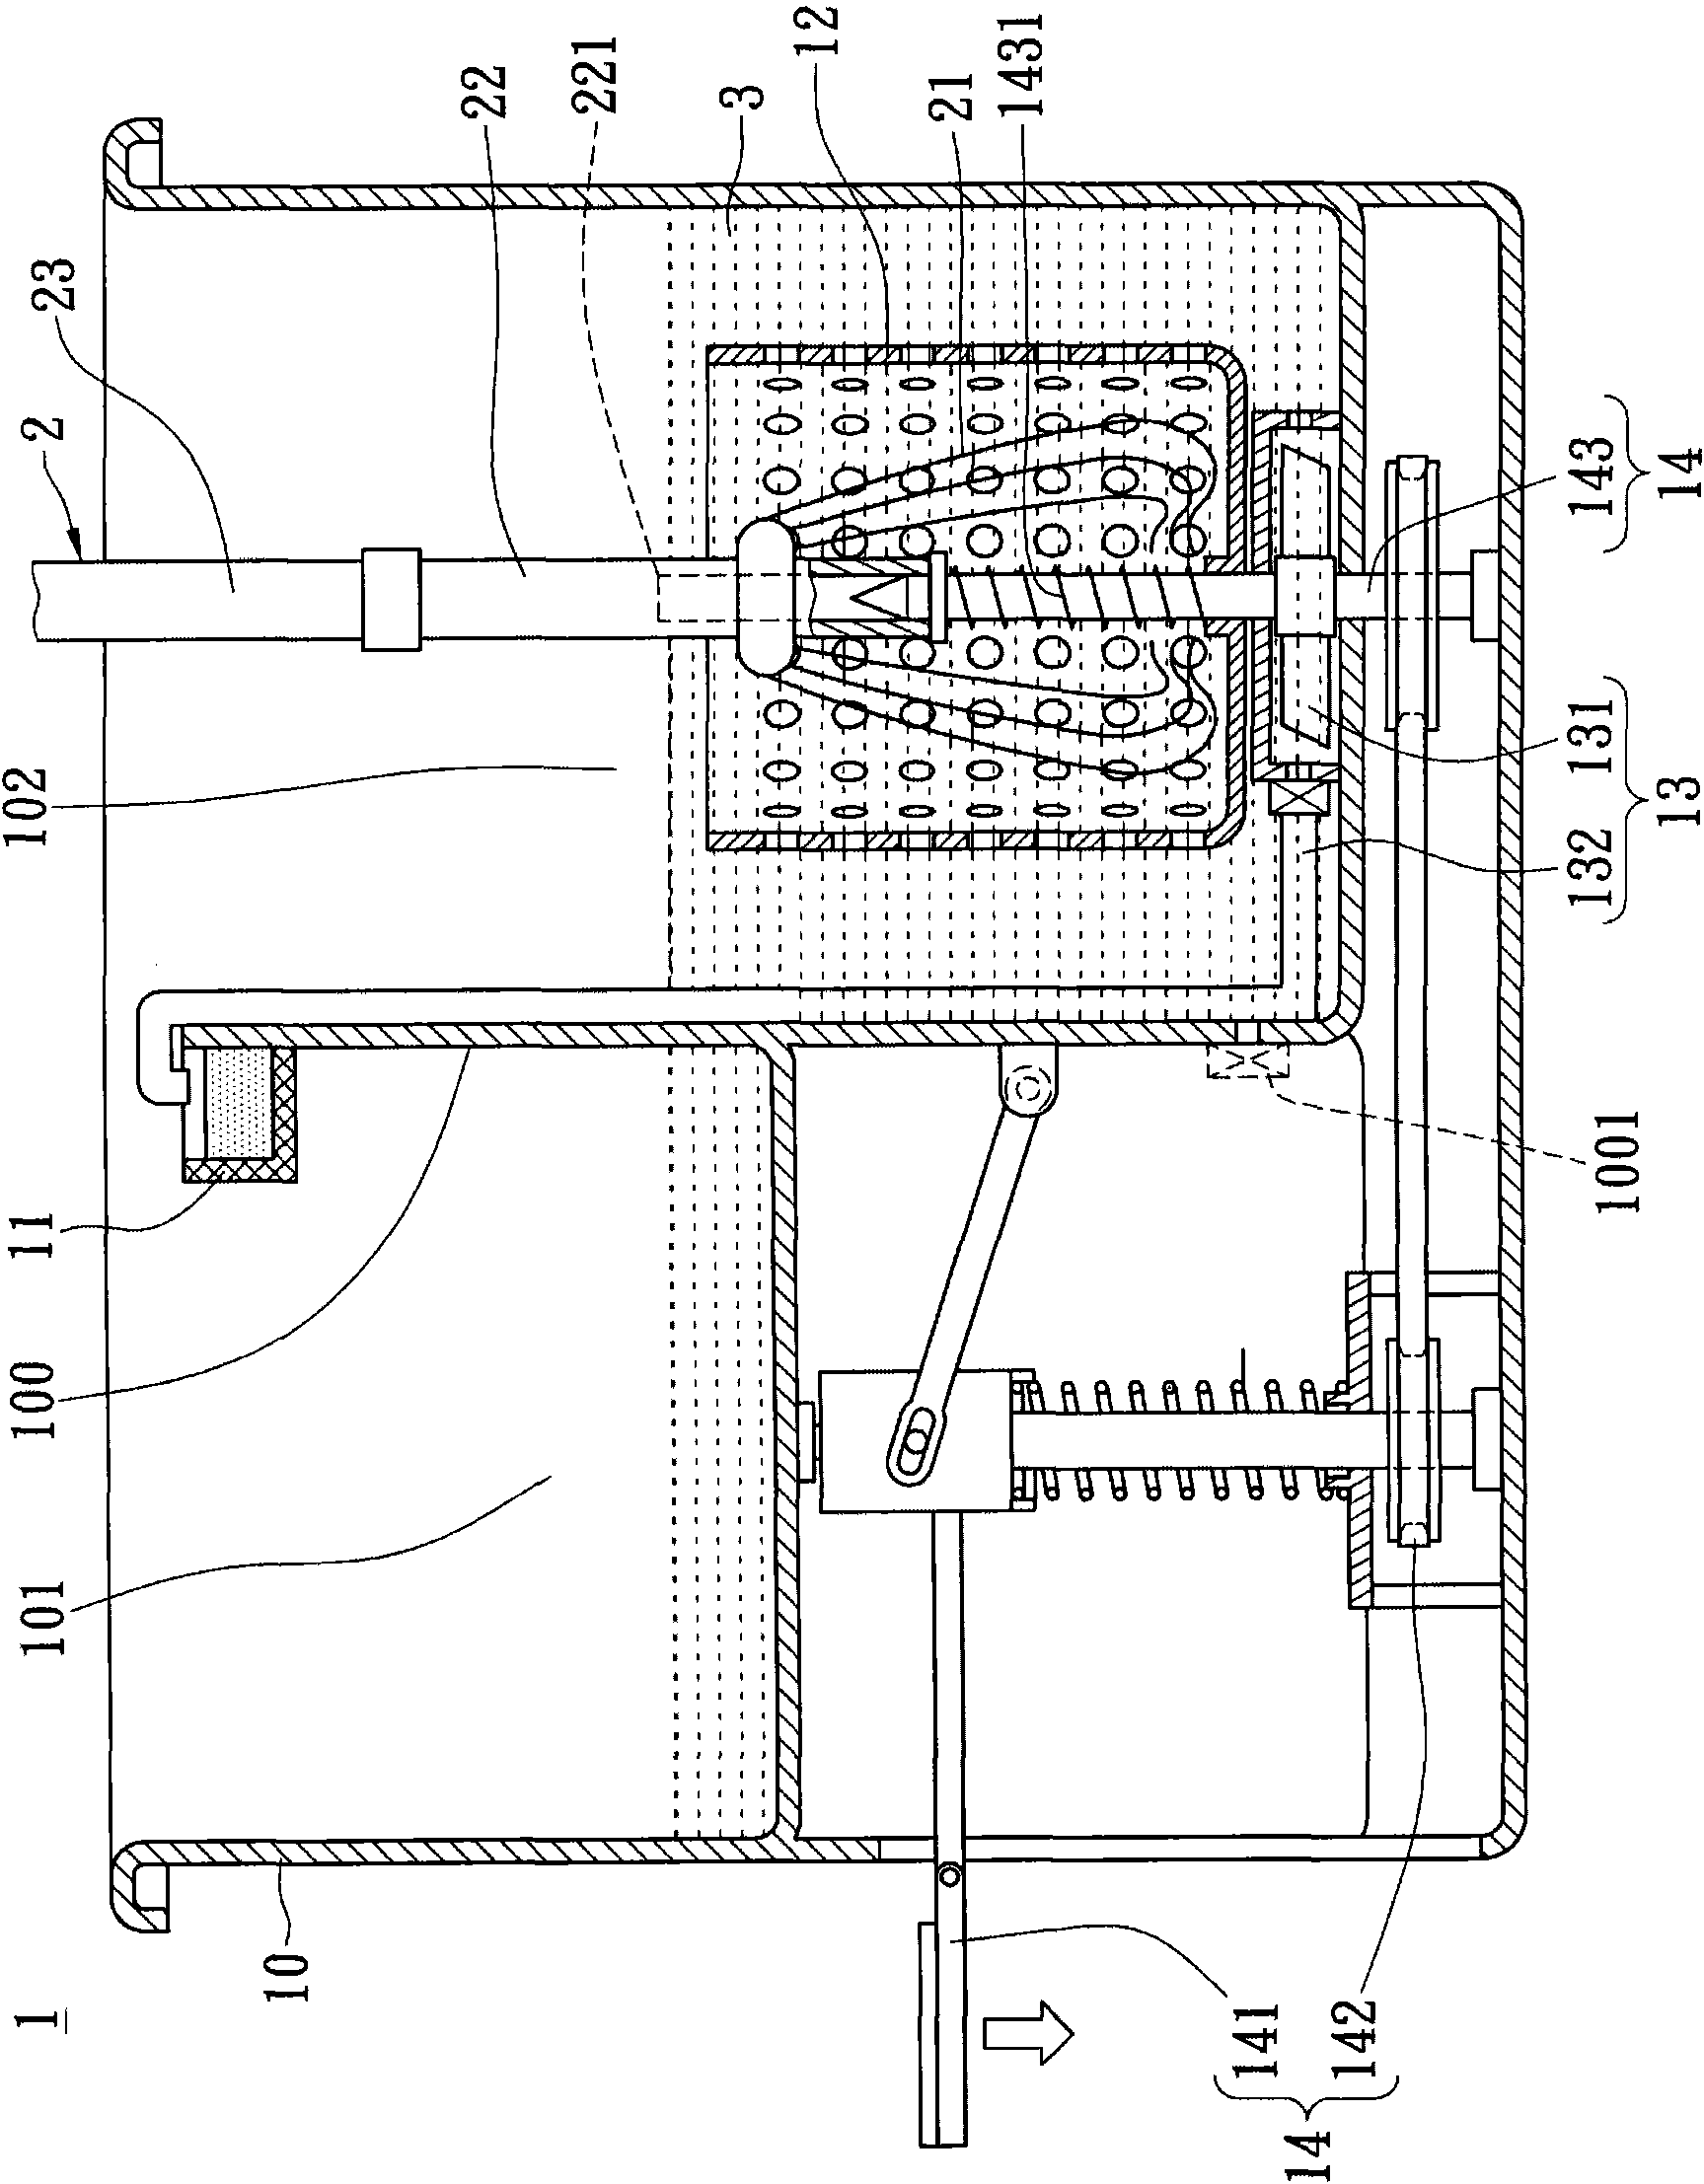 Circulating dehydration device and method